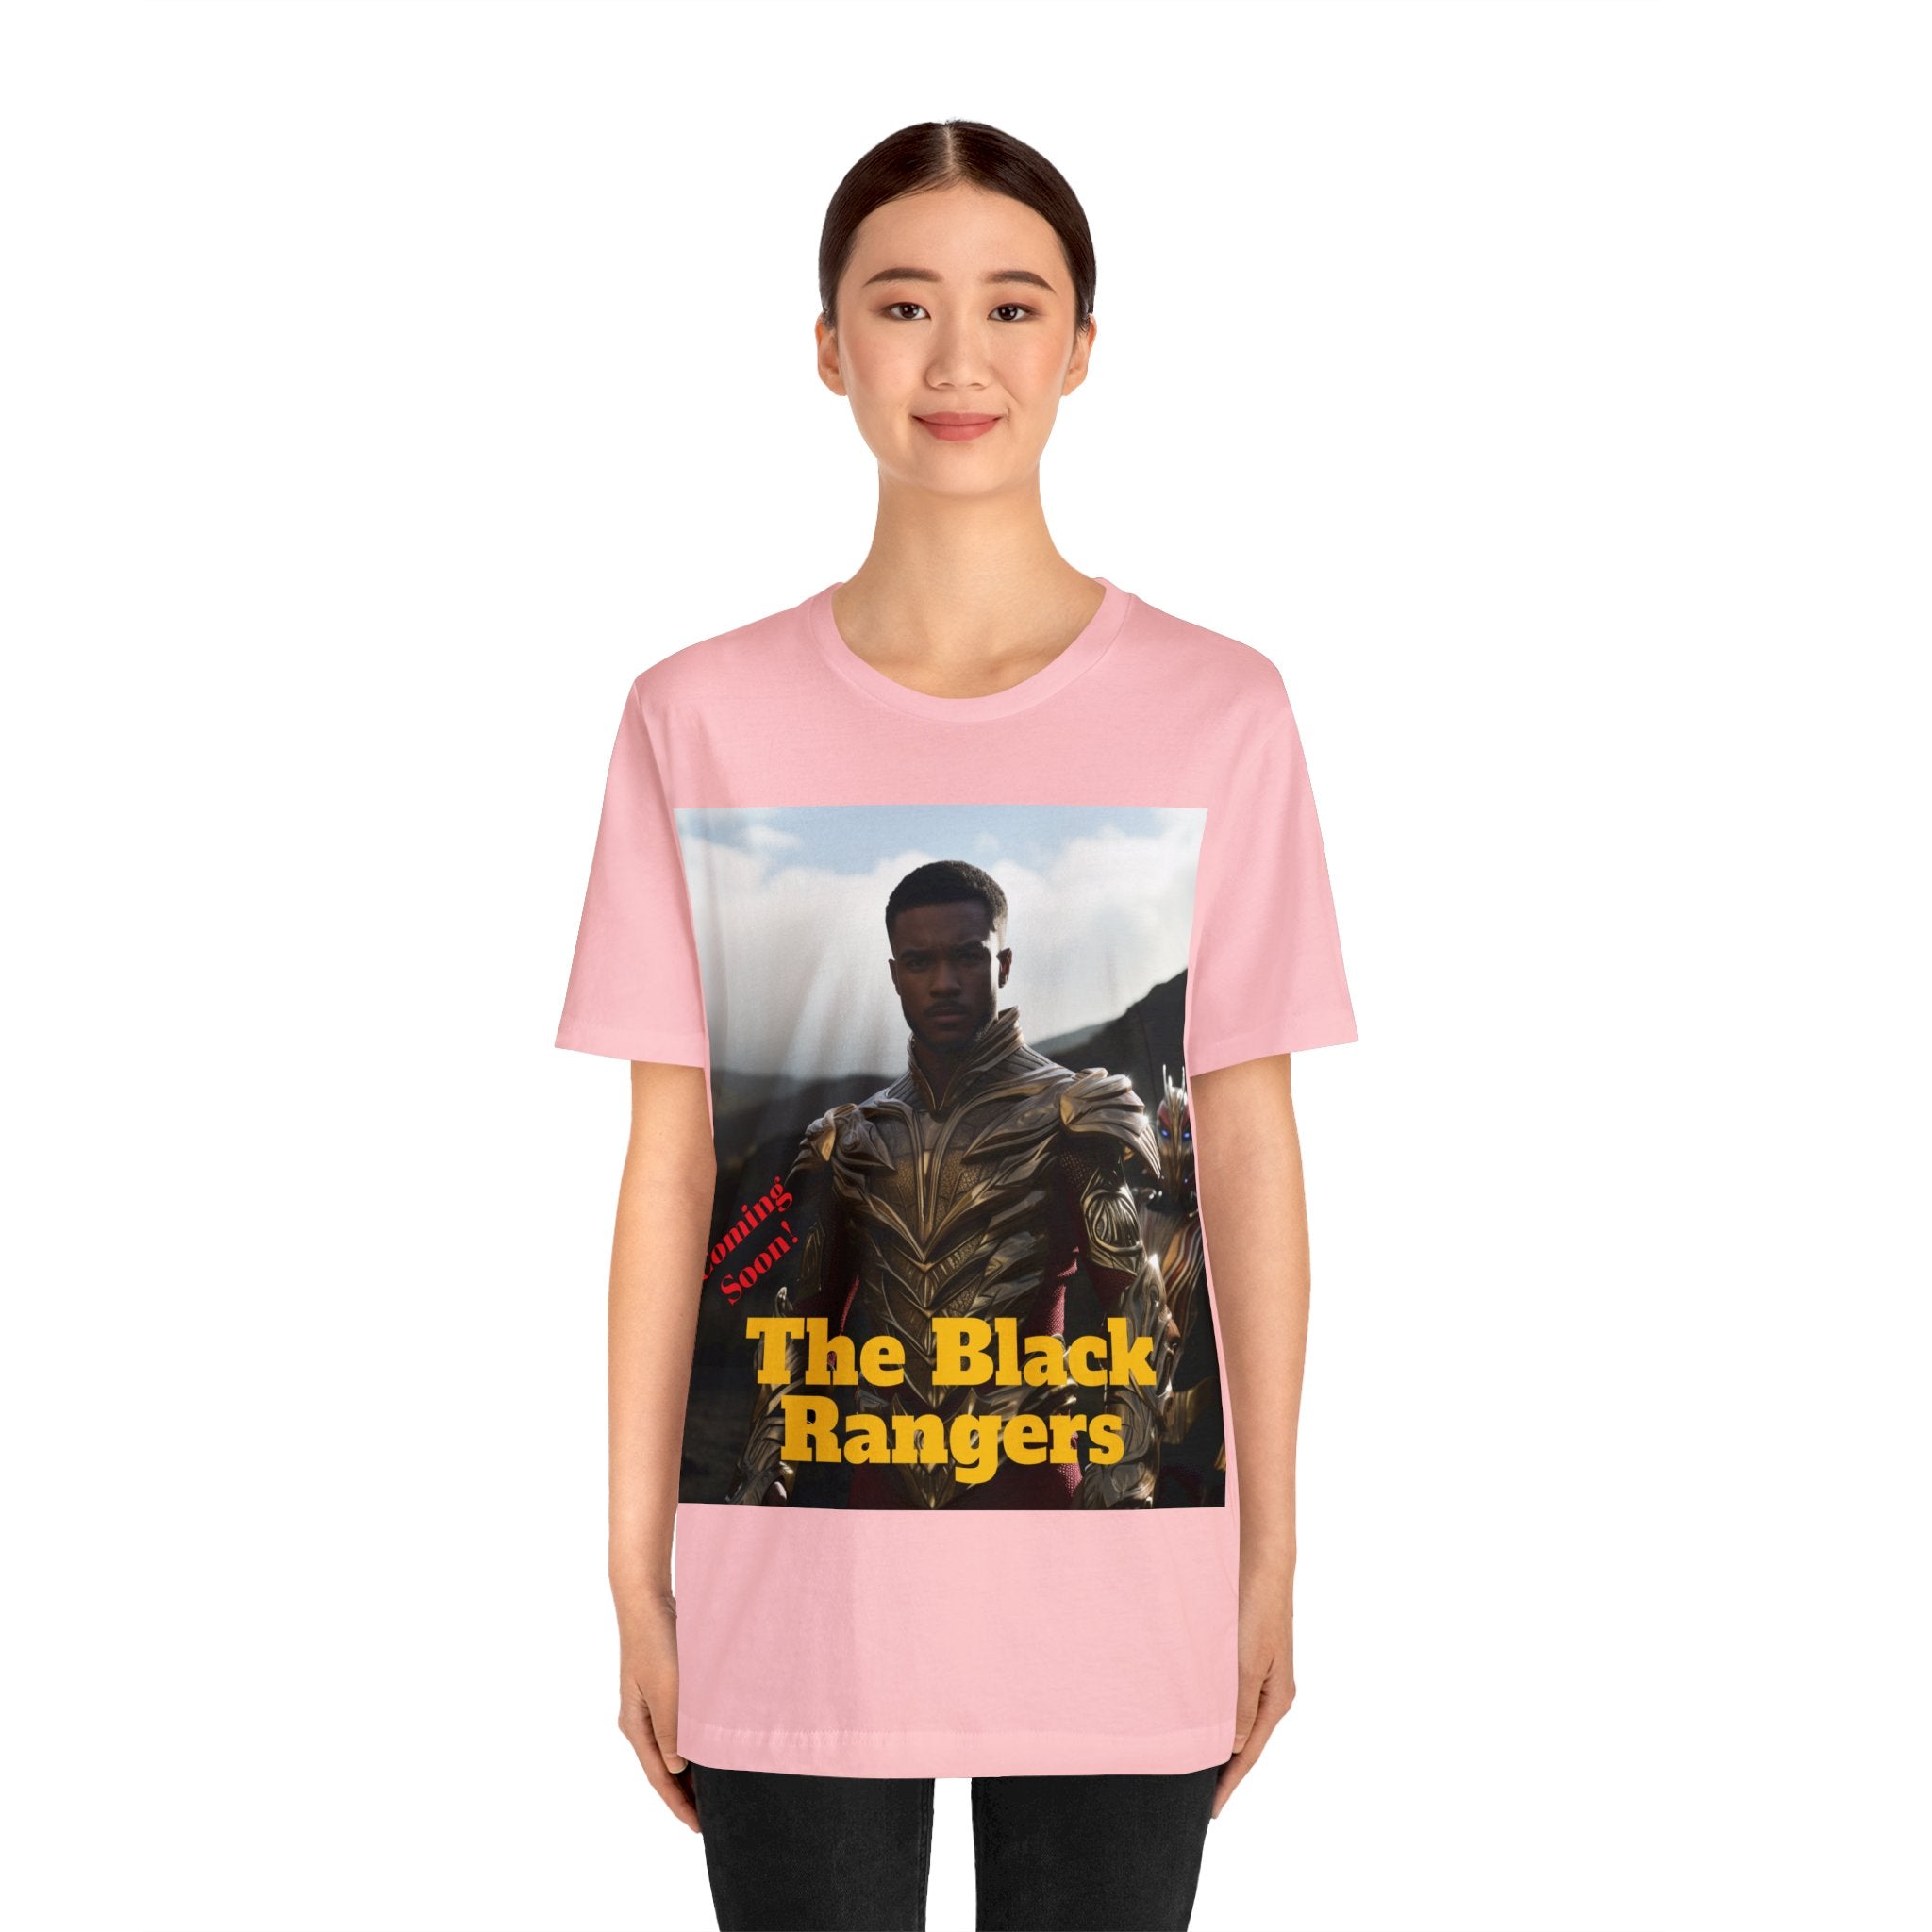 "The Black Rangers: Afro-American Excellence - Retro Inspired Unisex Jersey Short Sleeve Tee - Celebrating Diversity in Heroic Style"